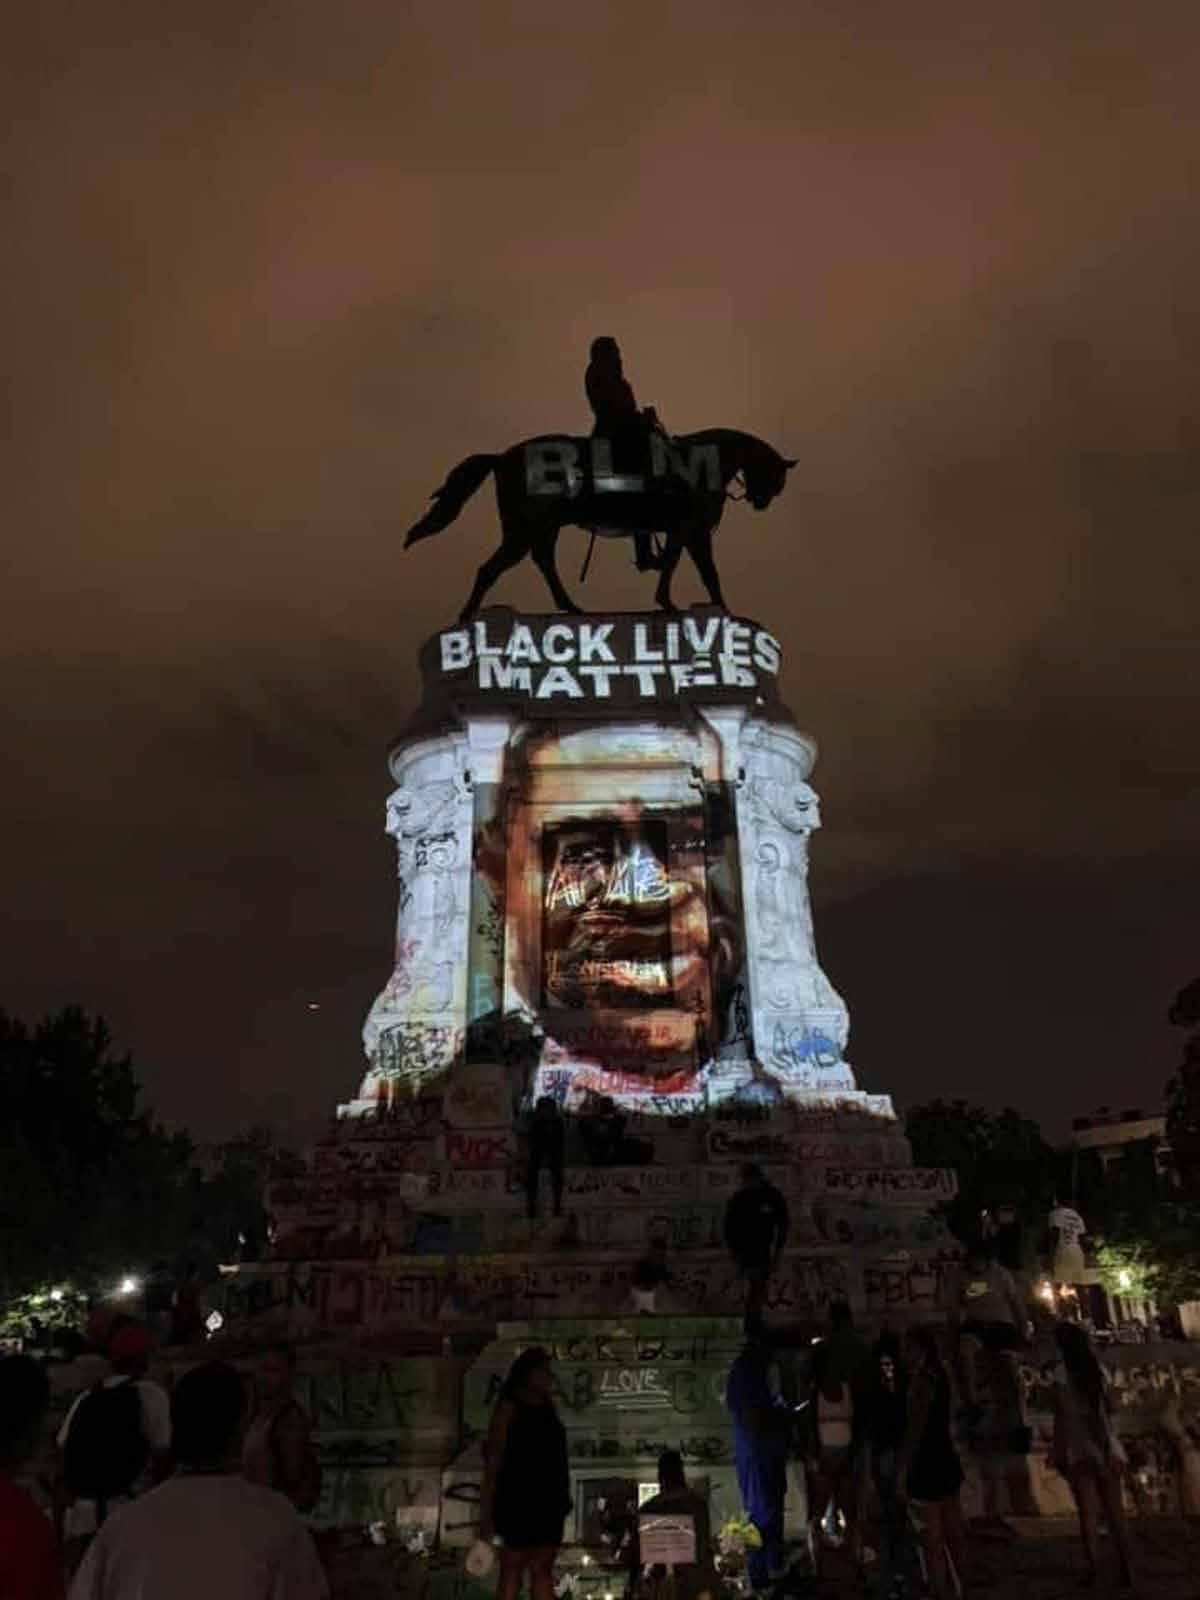 A large statue with a projected image of a person's face and text.